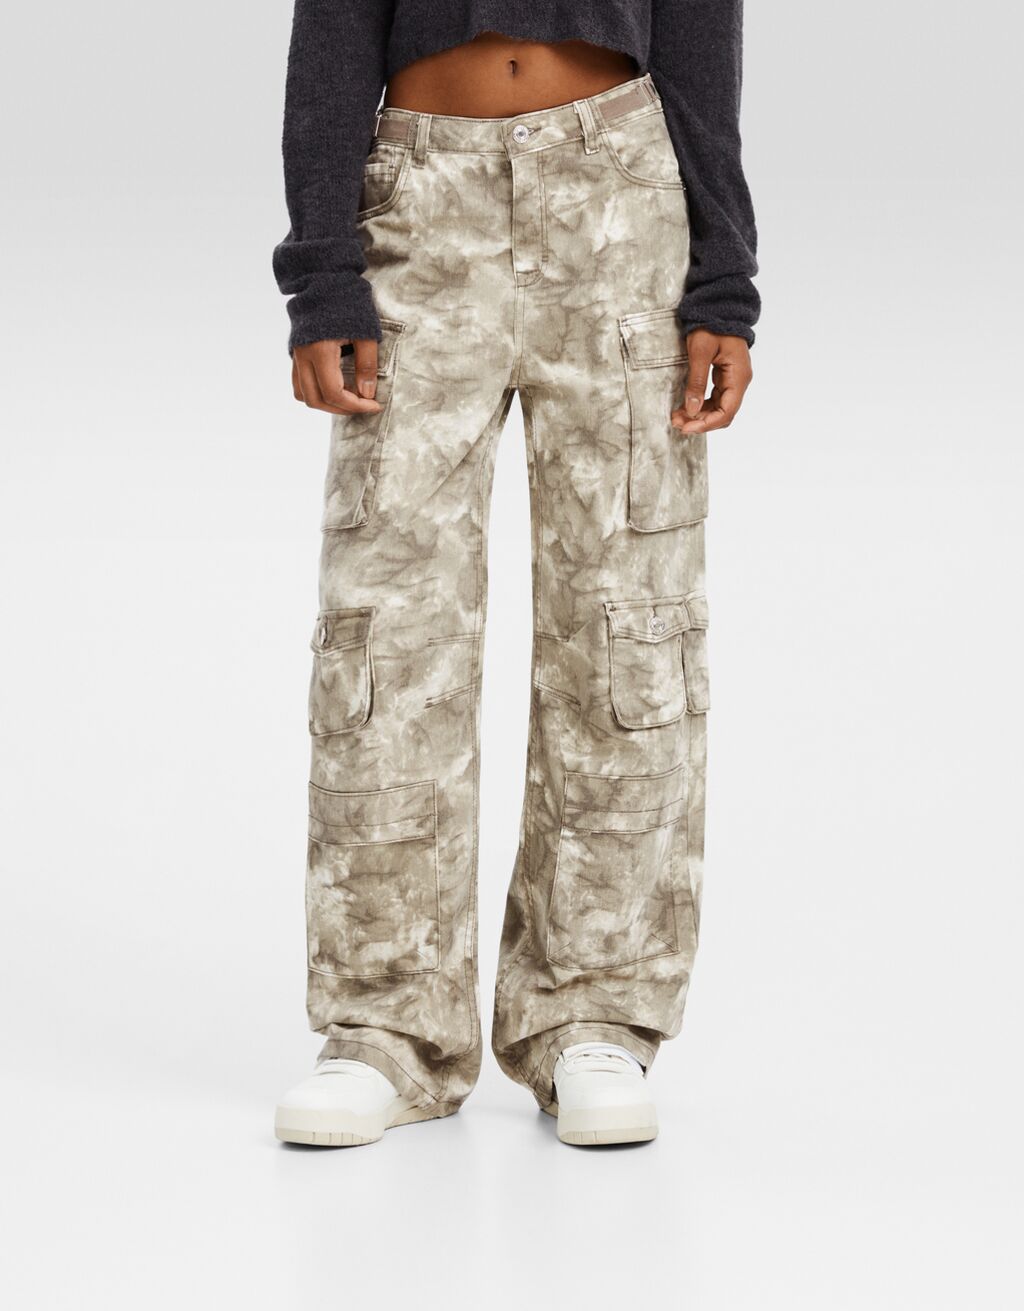 Multi-pocket twill cargo printed trousers